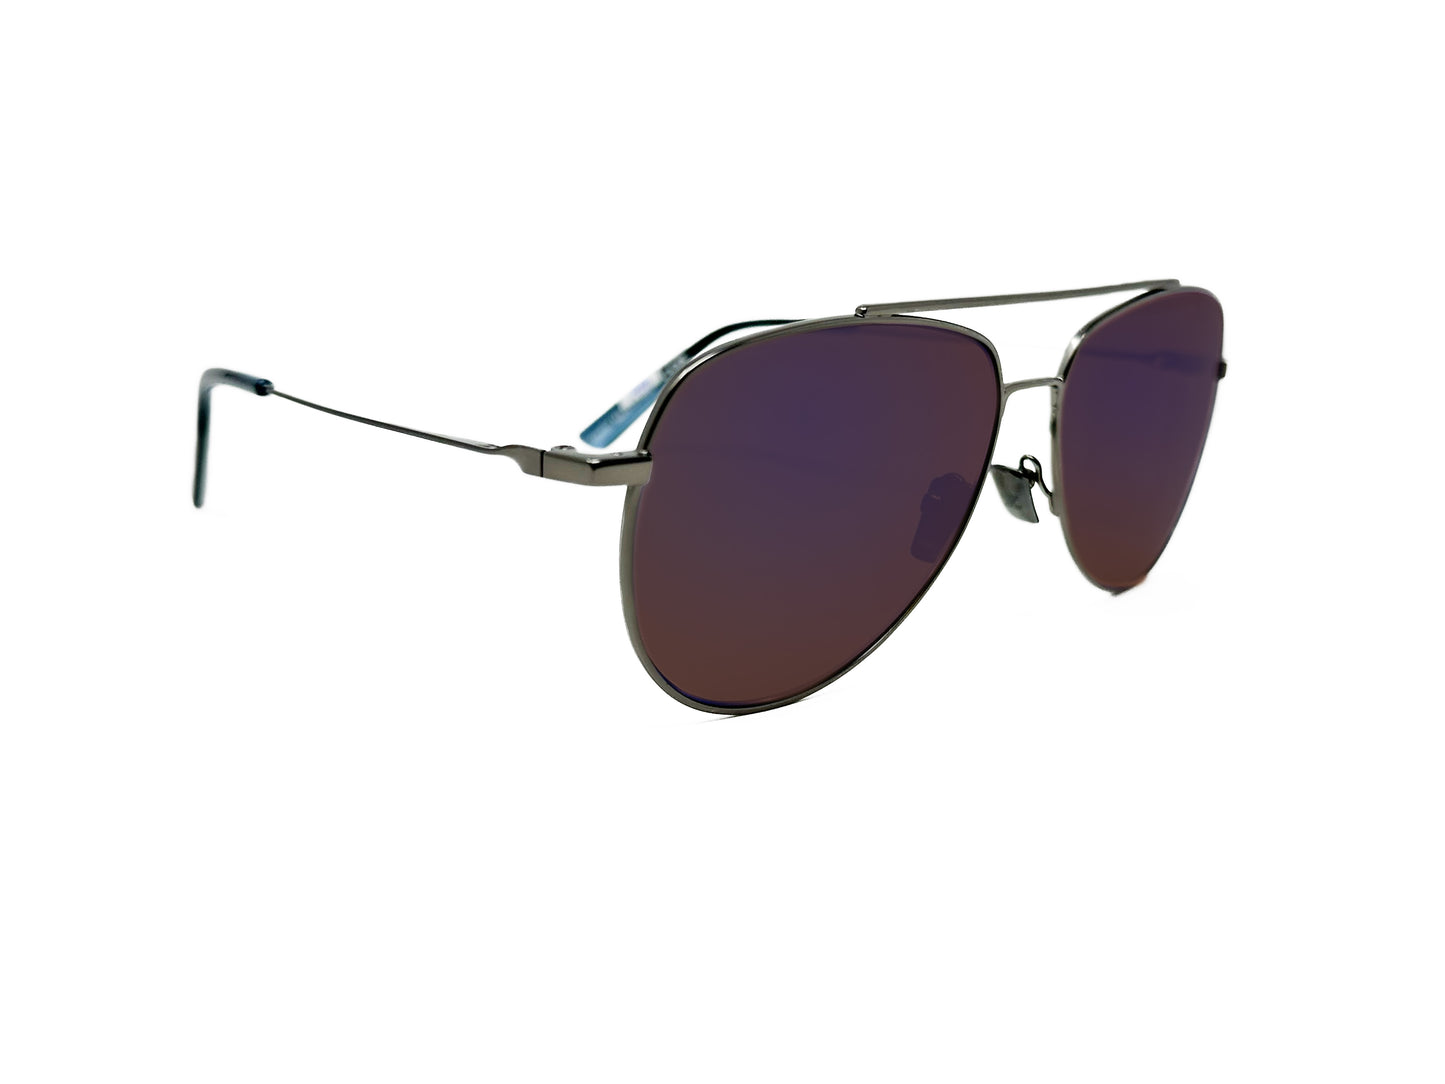 Zeal Optics rounded aviator style polarized sunglass. Model: Hawker. Color: 12720 - Gunmetal with brown lens with blue flash. Side view.